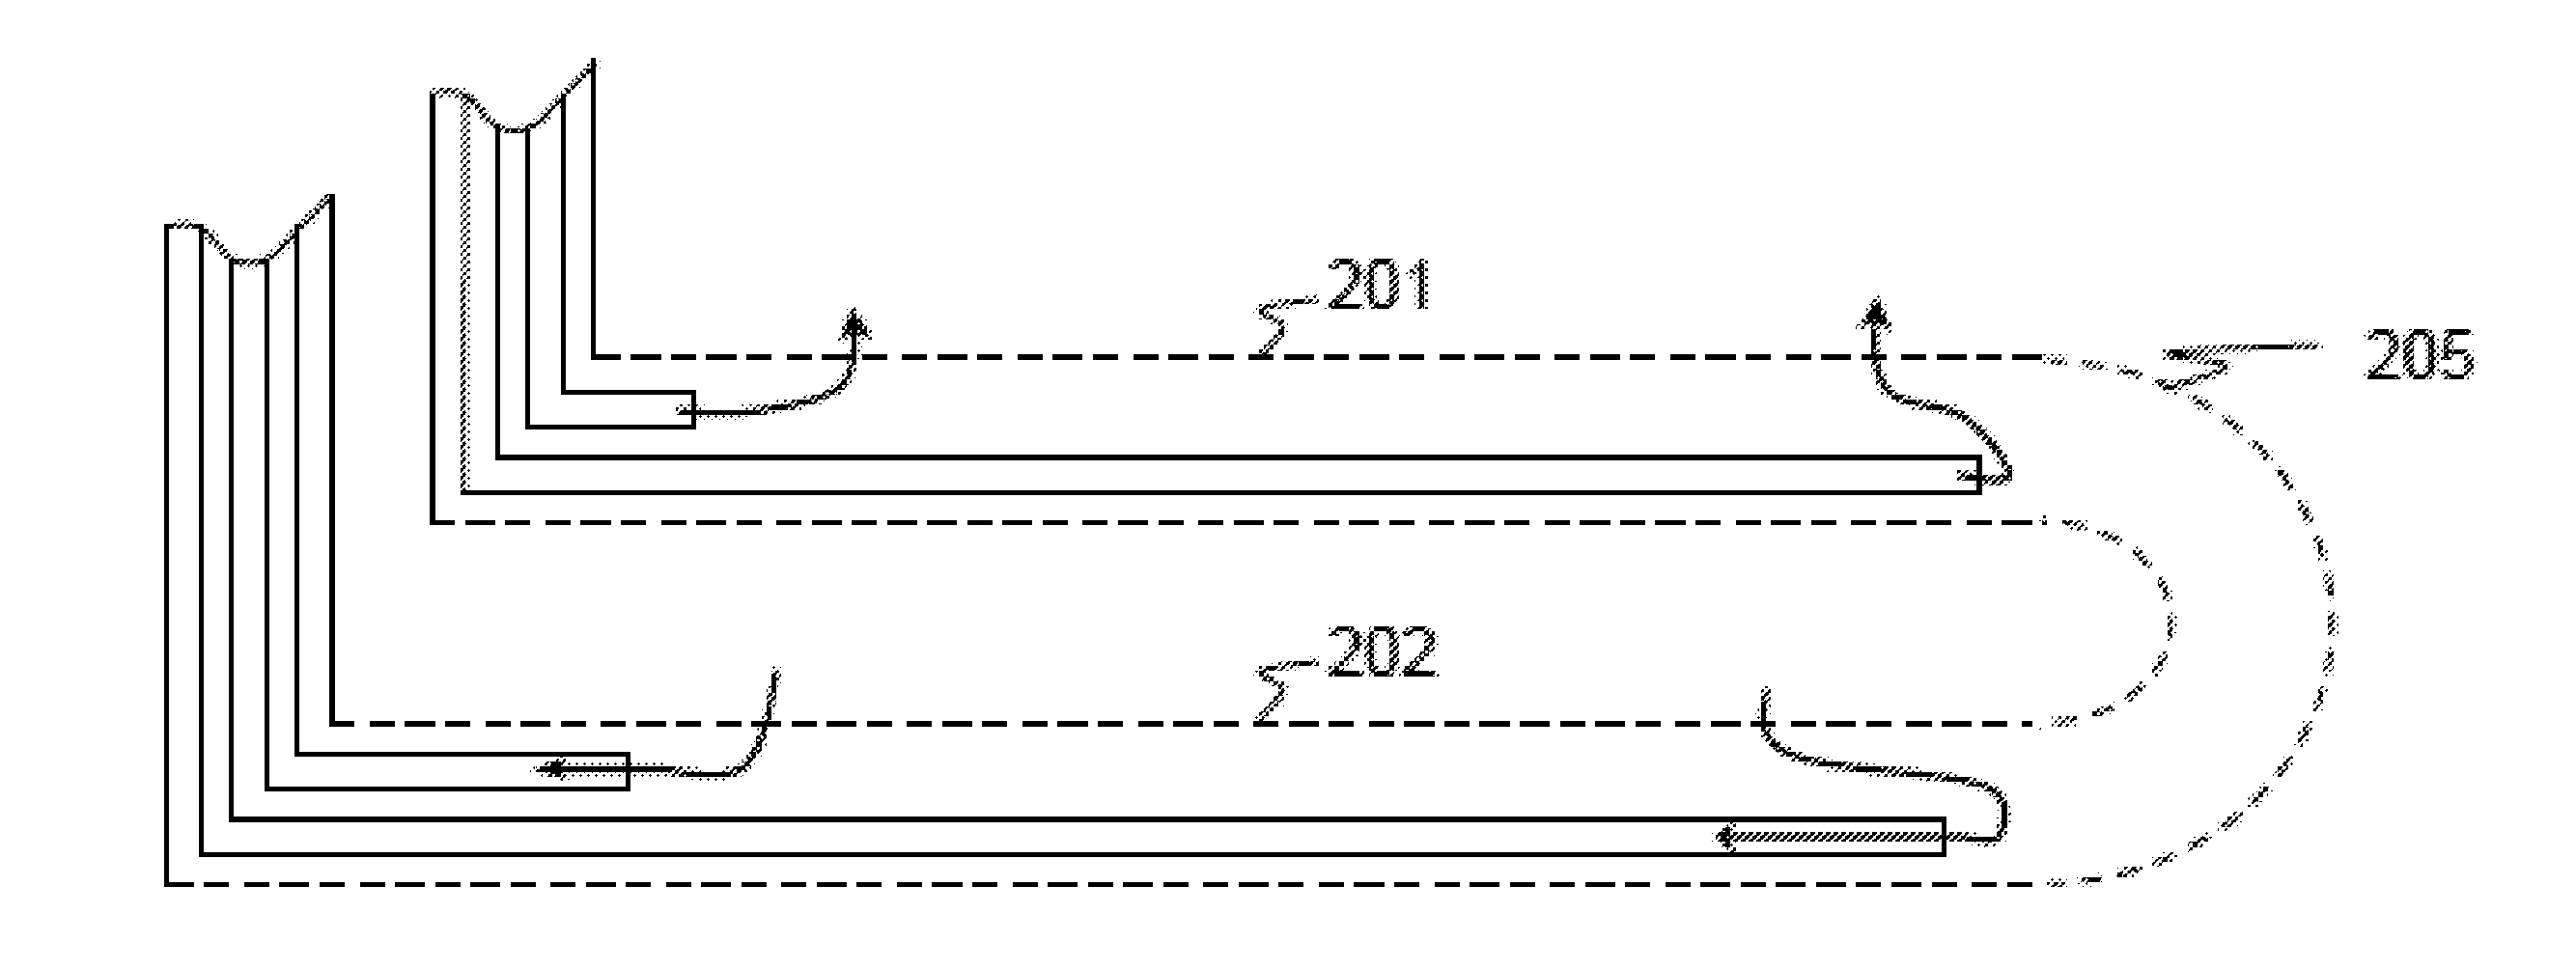 Producer snorkel or injector toe-dip to accelerate communication between SAGD producer and injector